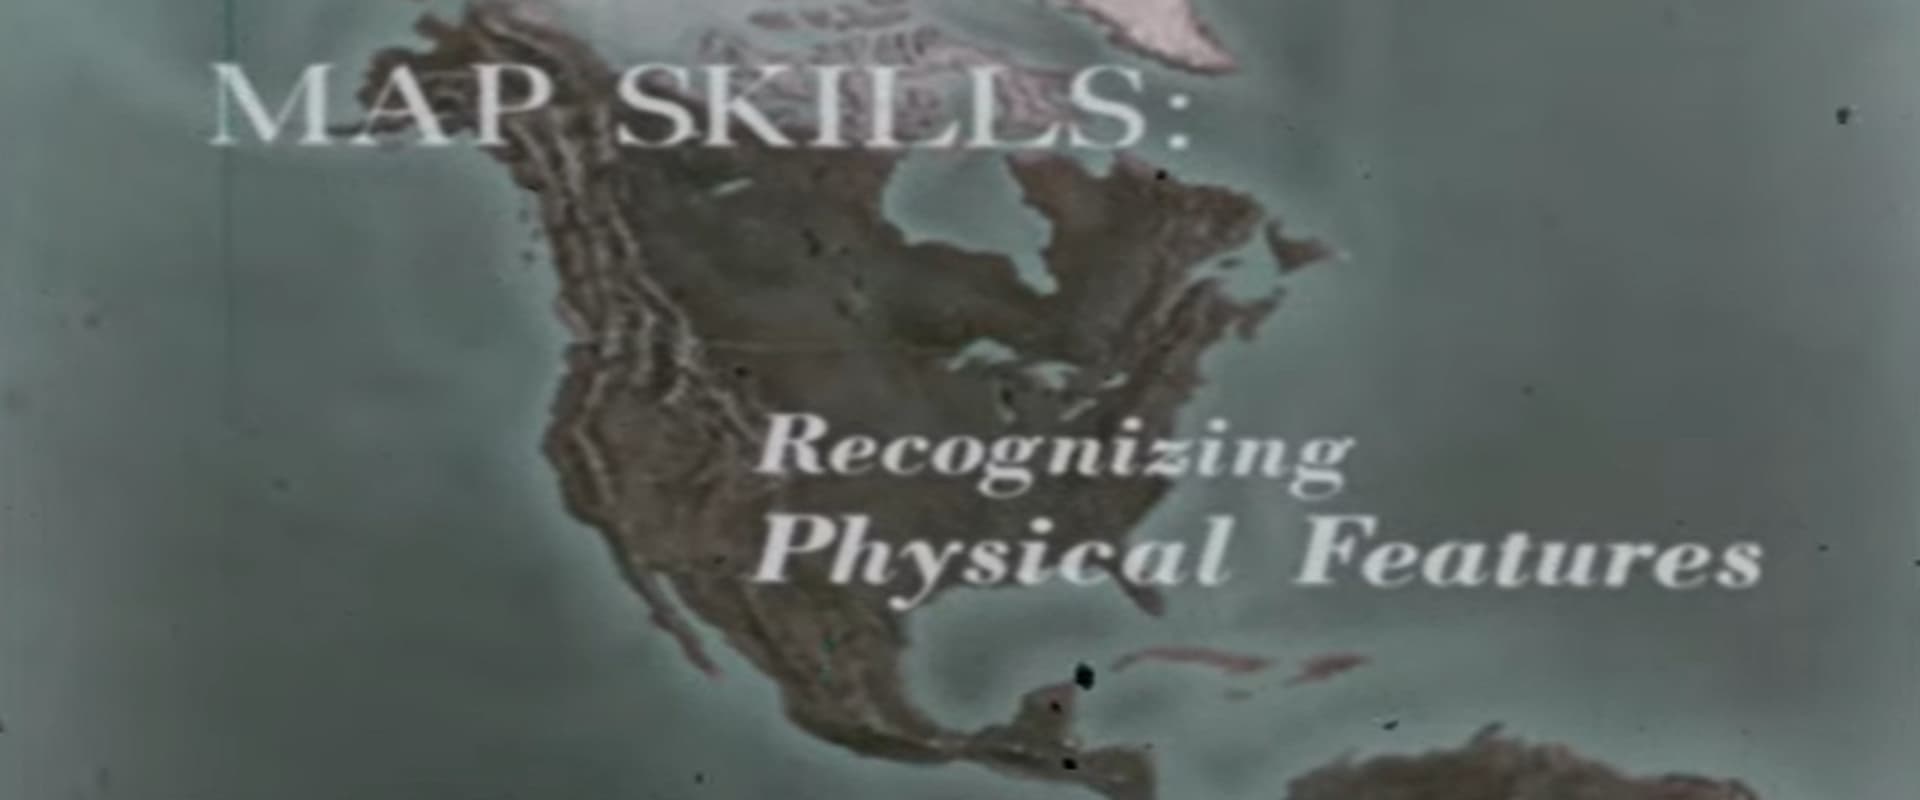 Map Skills: Recognizing Physical Features